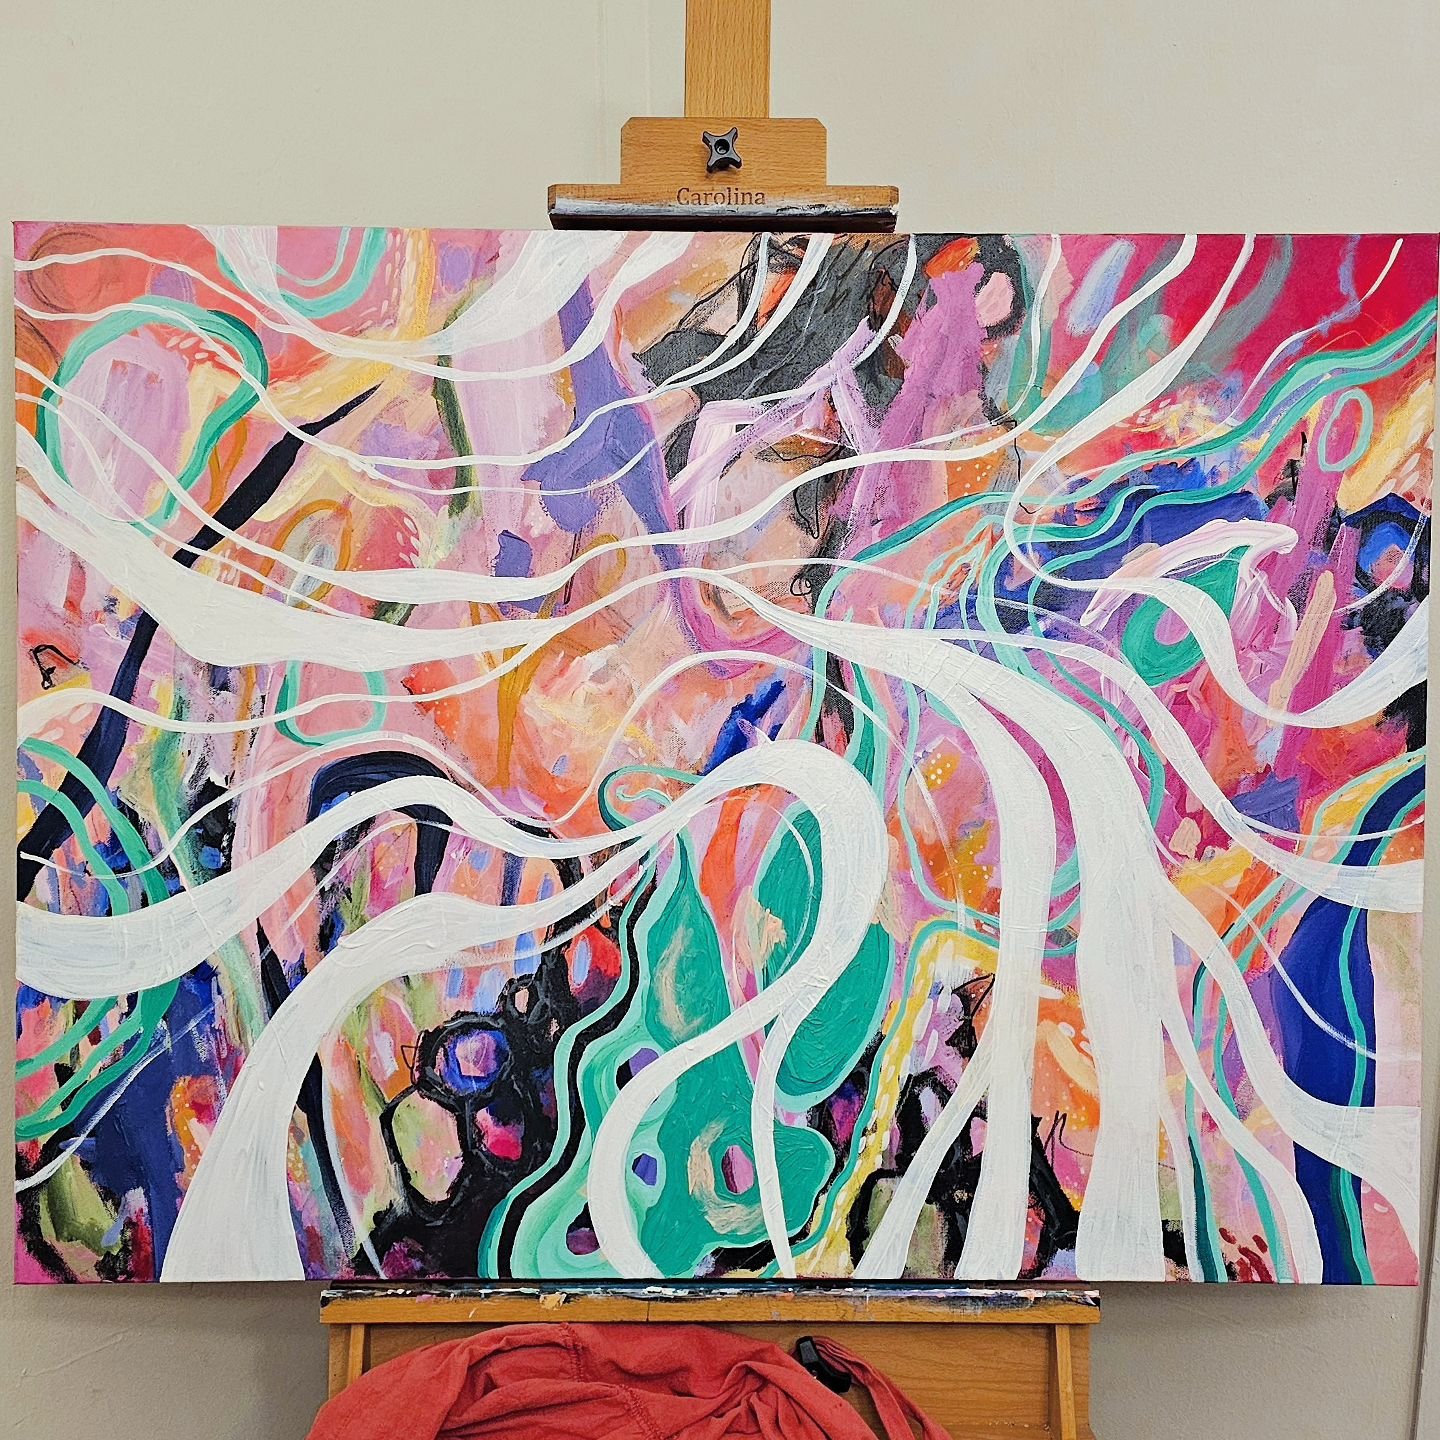 If you've video called with me this year, you've probably seen this painting behind me looking much the same.  It's gone through some progress this weekend, so here's an updated view✨️ 

#waveforms #radicalhope #art912 #growth #colorfulart #savannaha